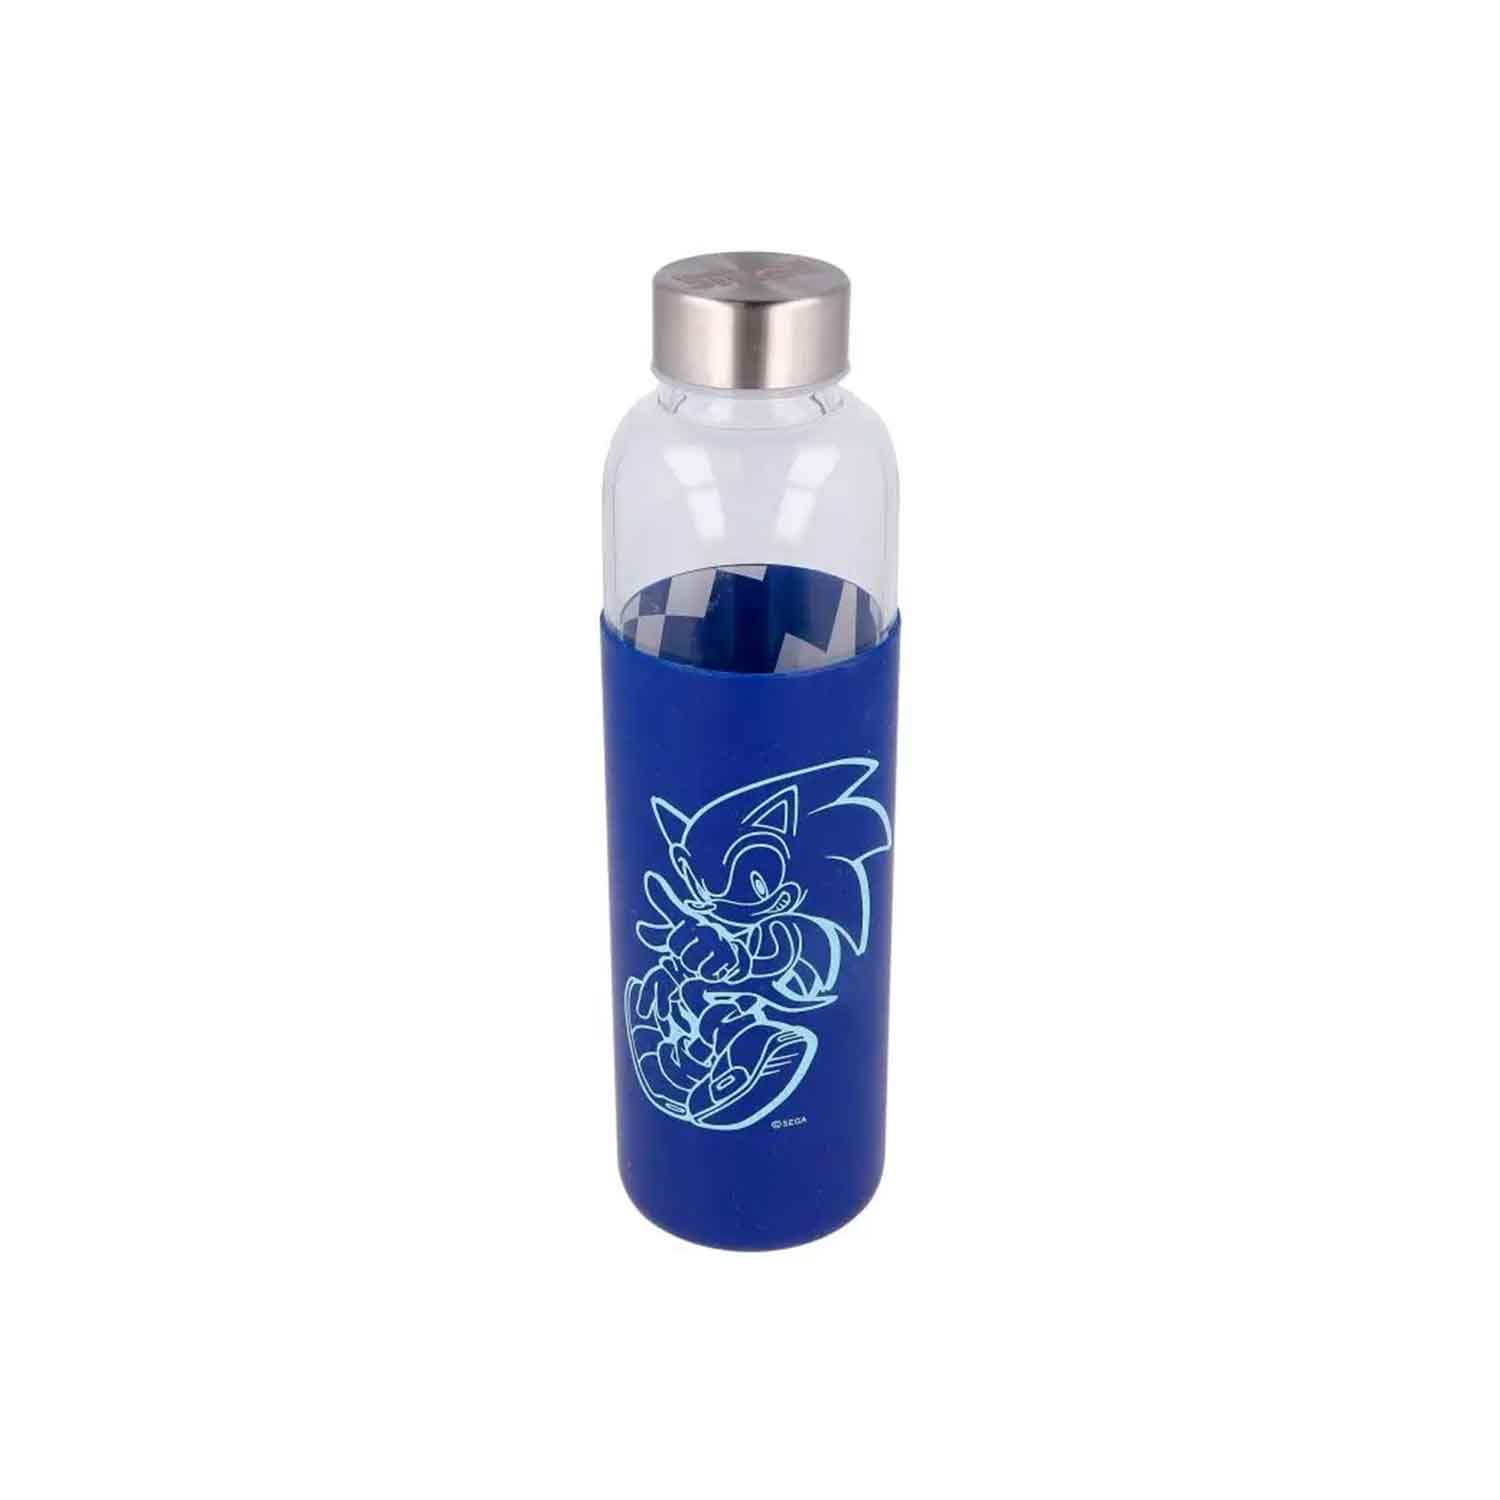 https://sunnygeeks.com/wp-content/uploads/2023/03/sonic-the-hedgehog-bottle-with-silicon-cover.jpg